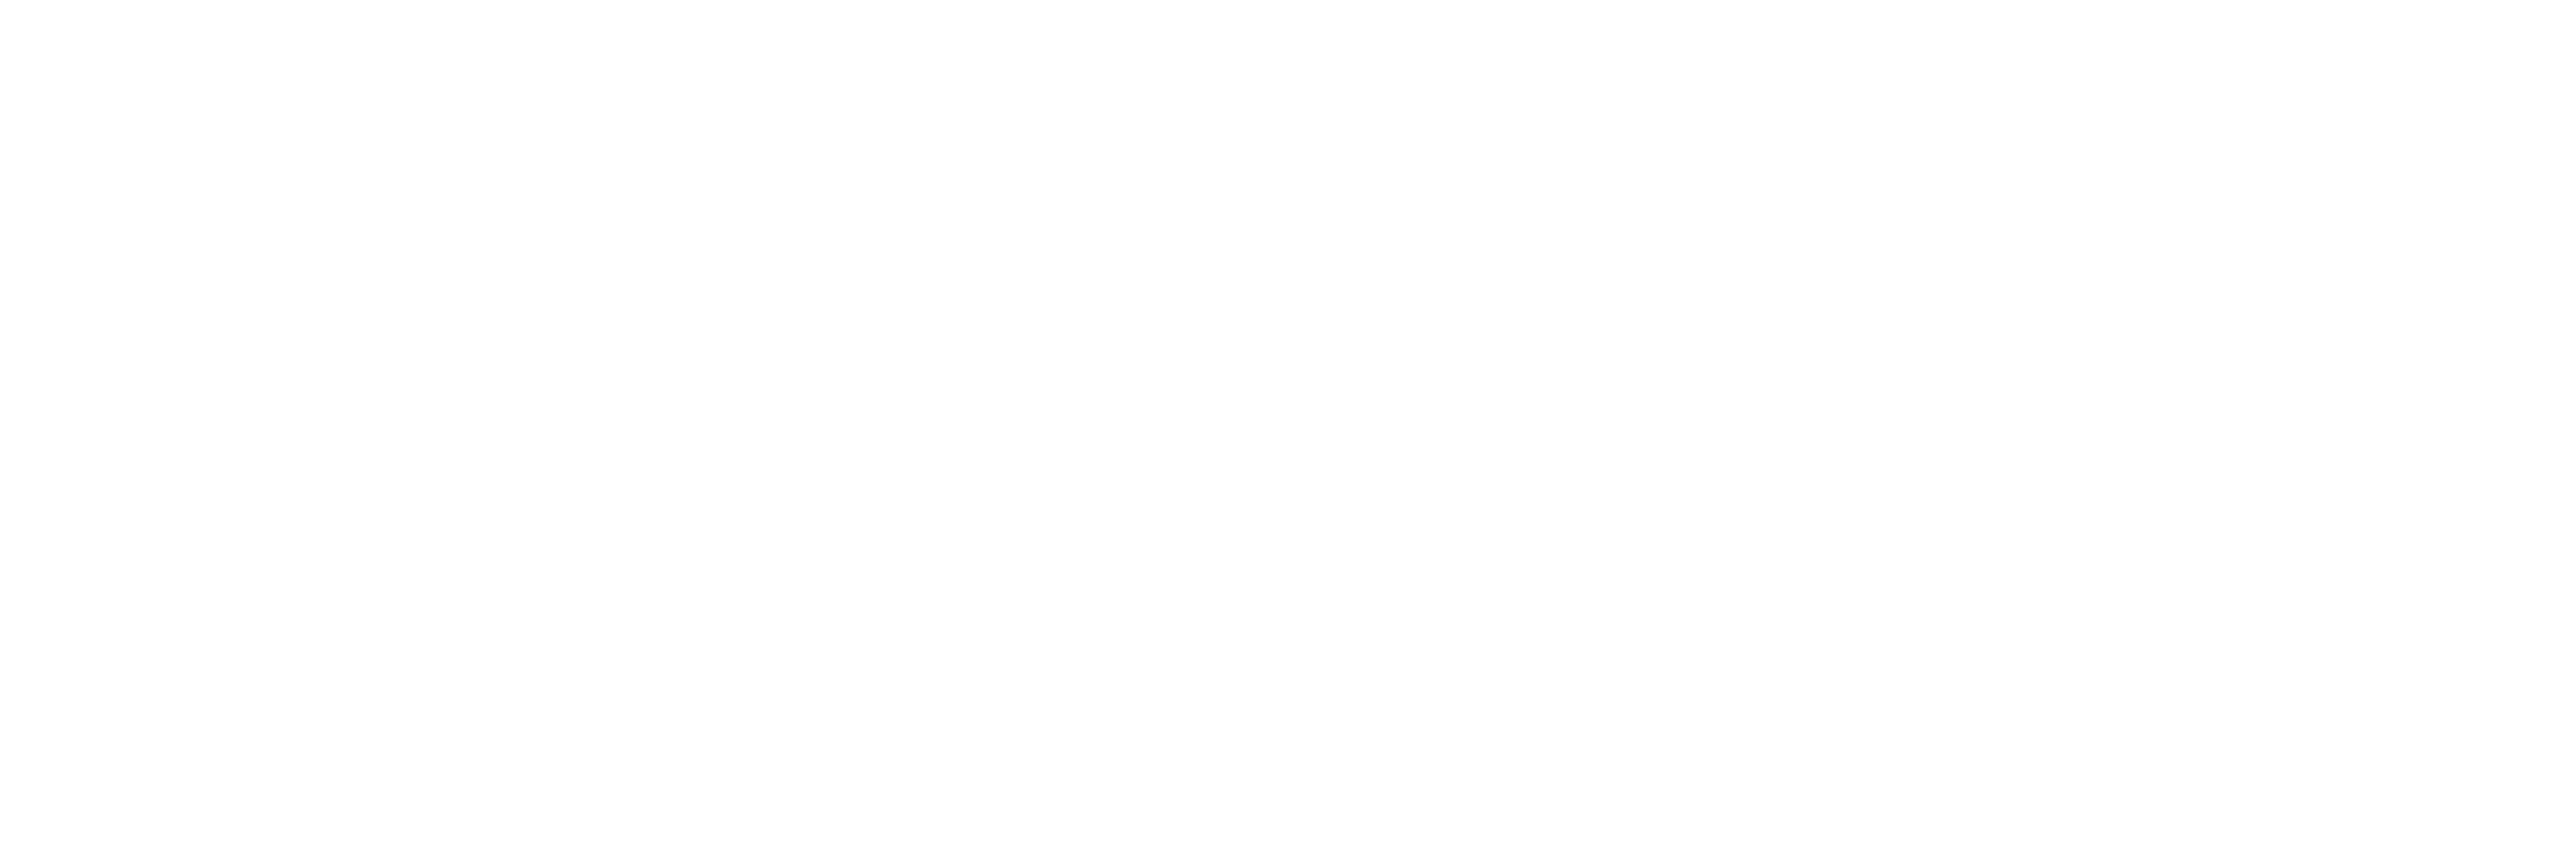 Powered by Guidesly